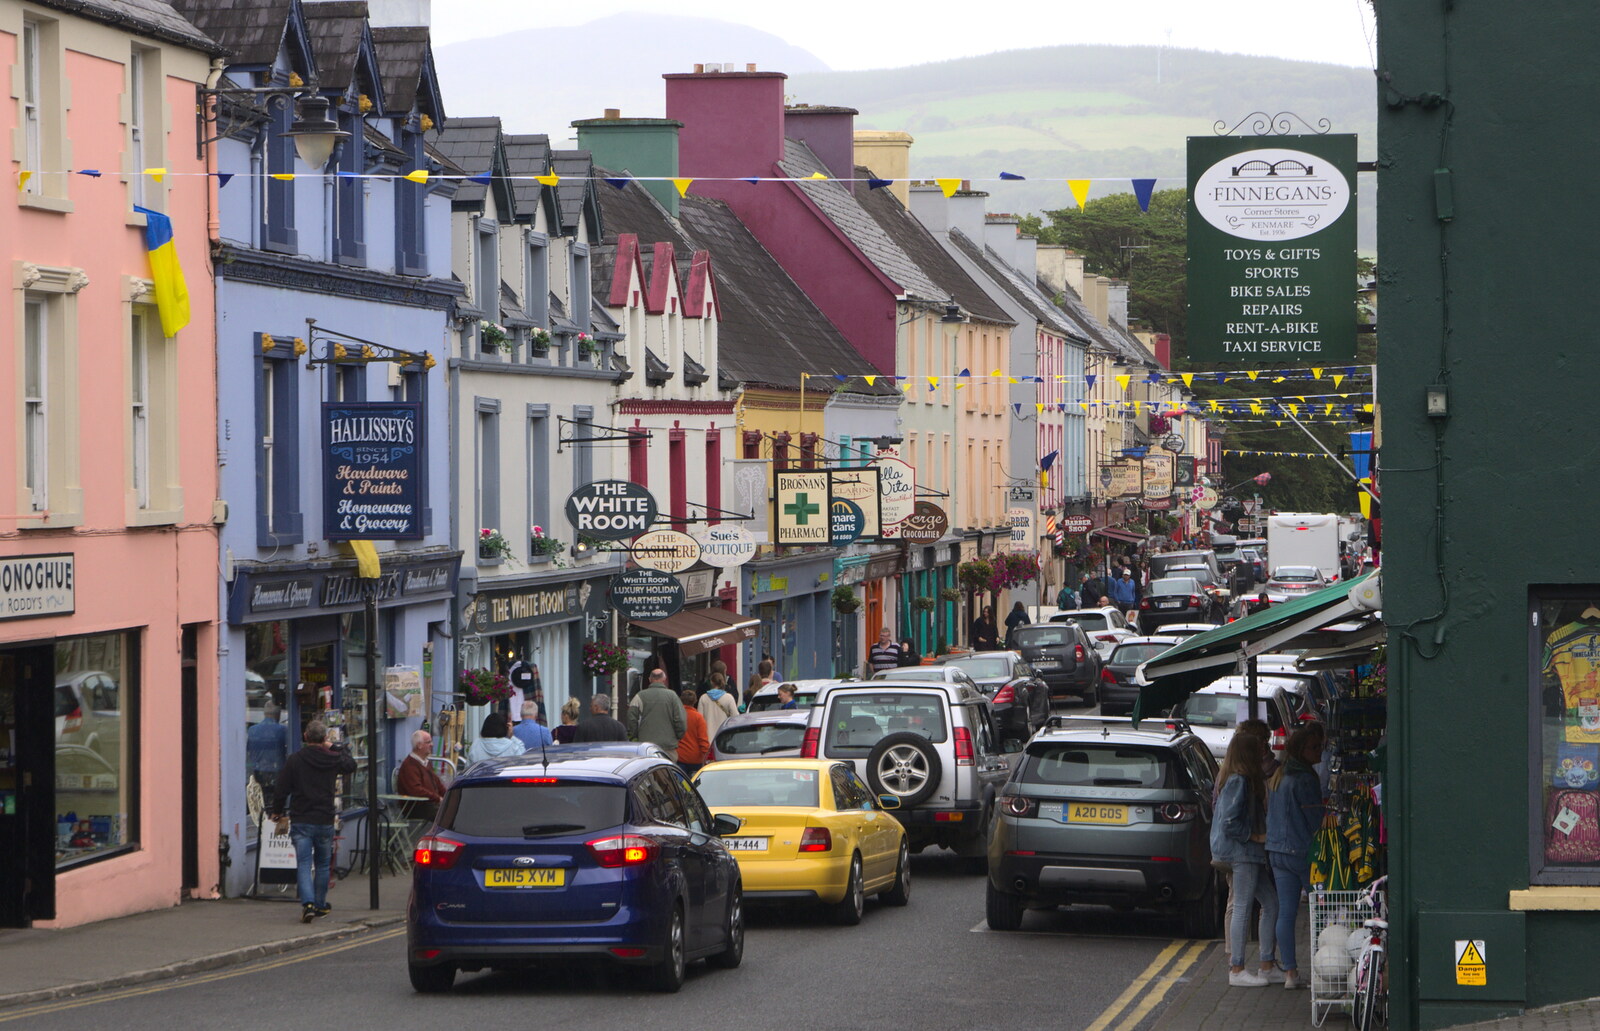 Kenmare high street from A Seafari Boat Trip, Kenmare, Kerry, Ireland - 3rd August 2017